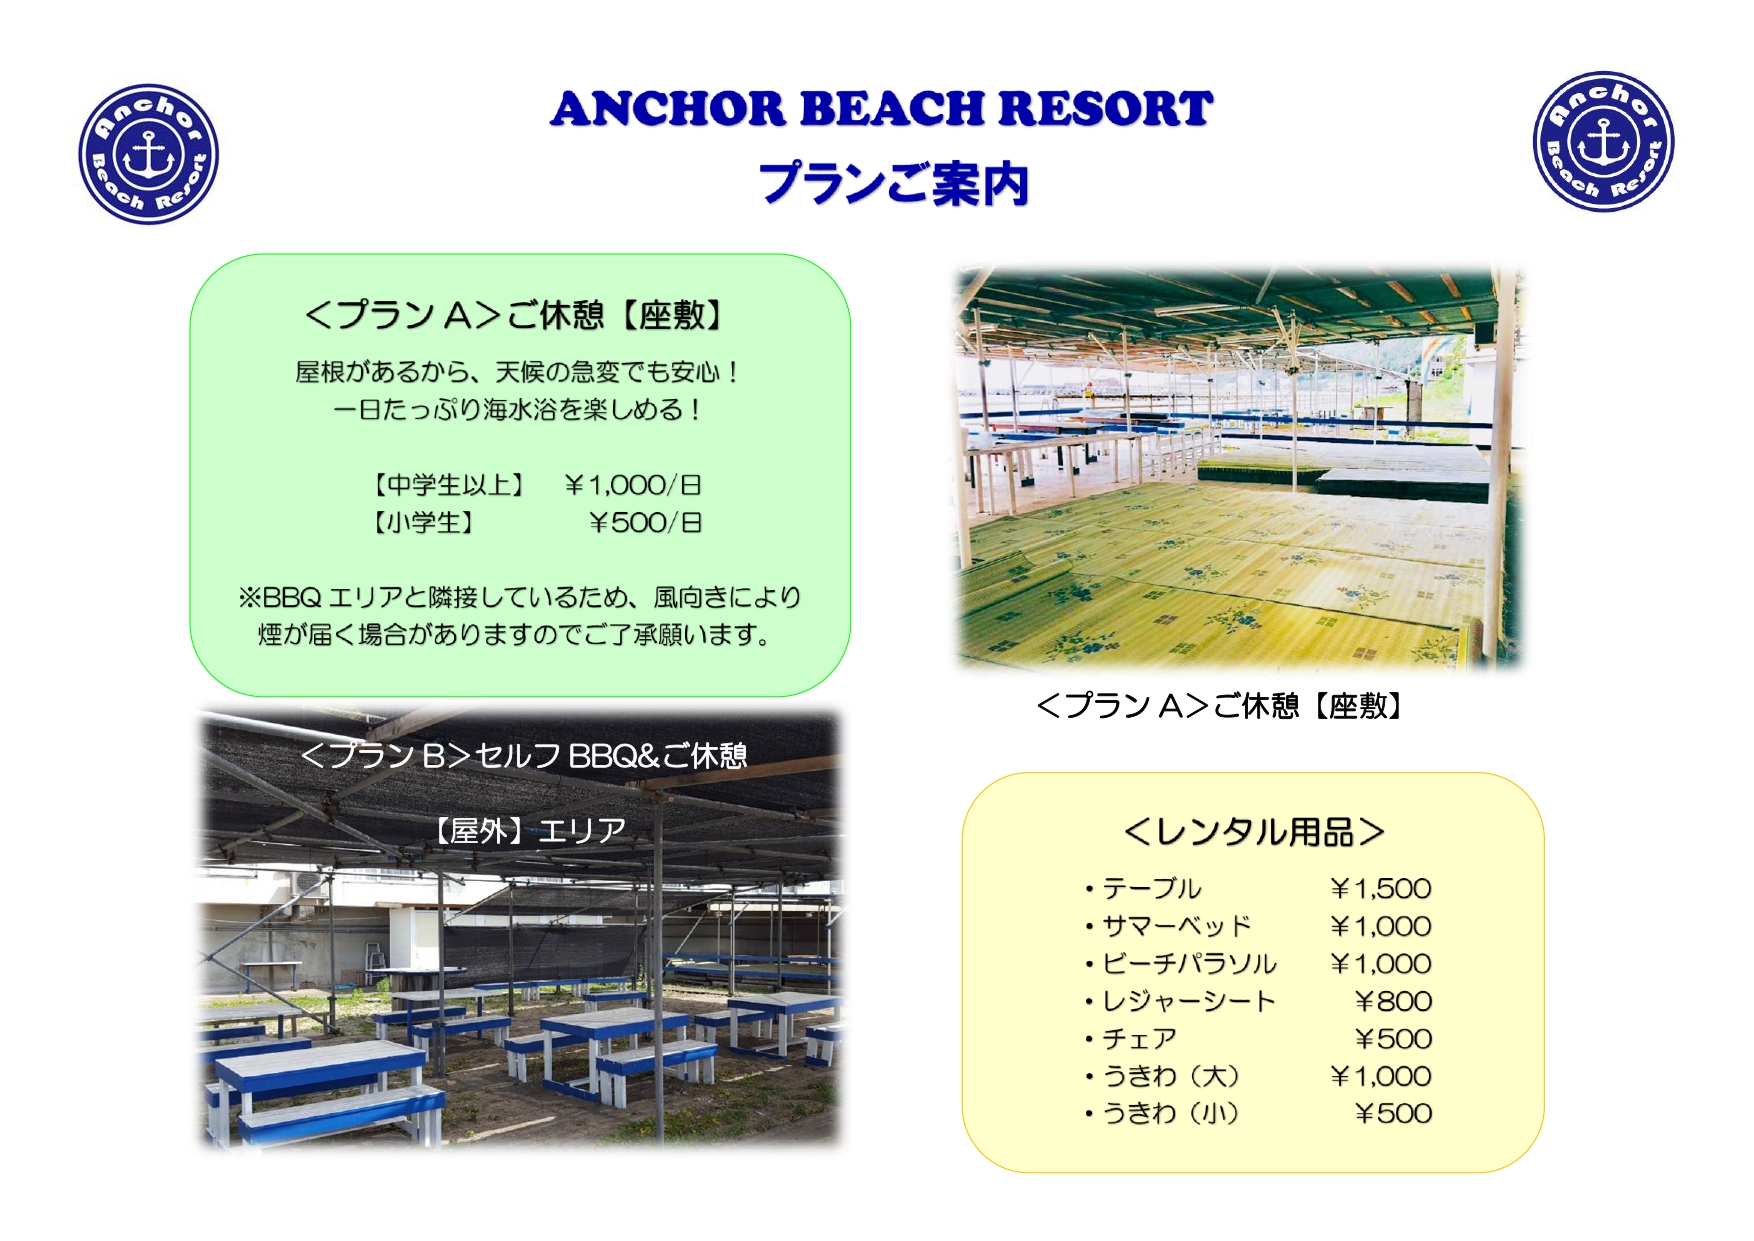 ABRご利用案内(2020)_page-0002.jpg